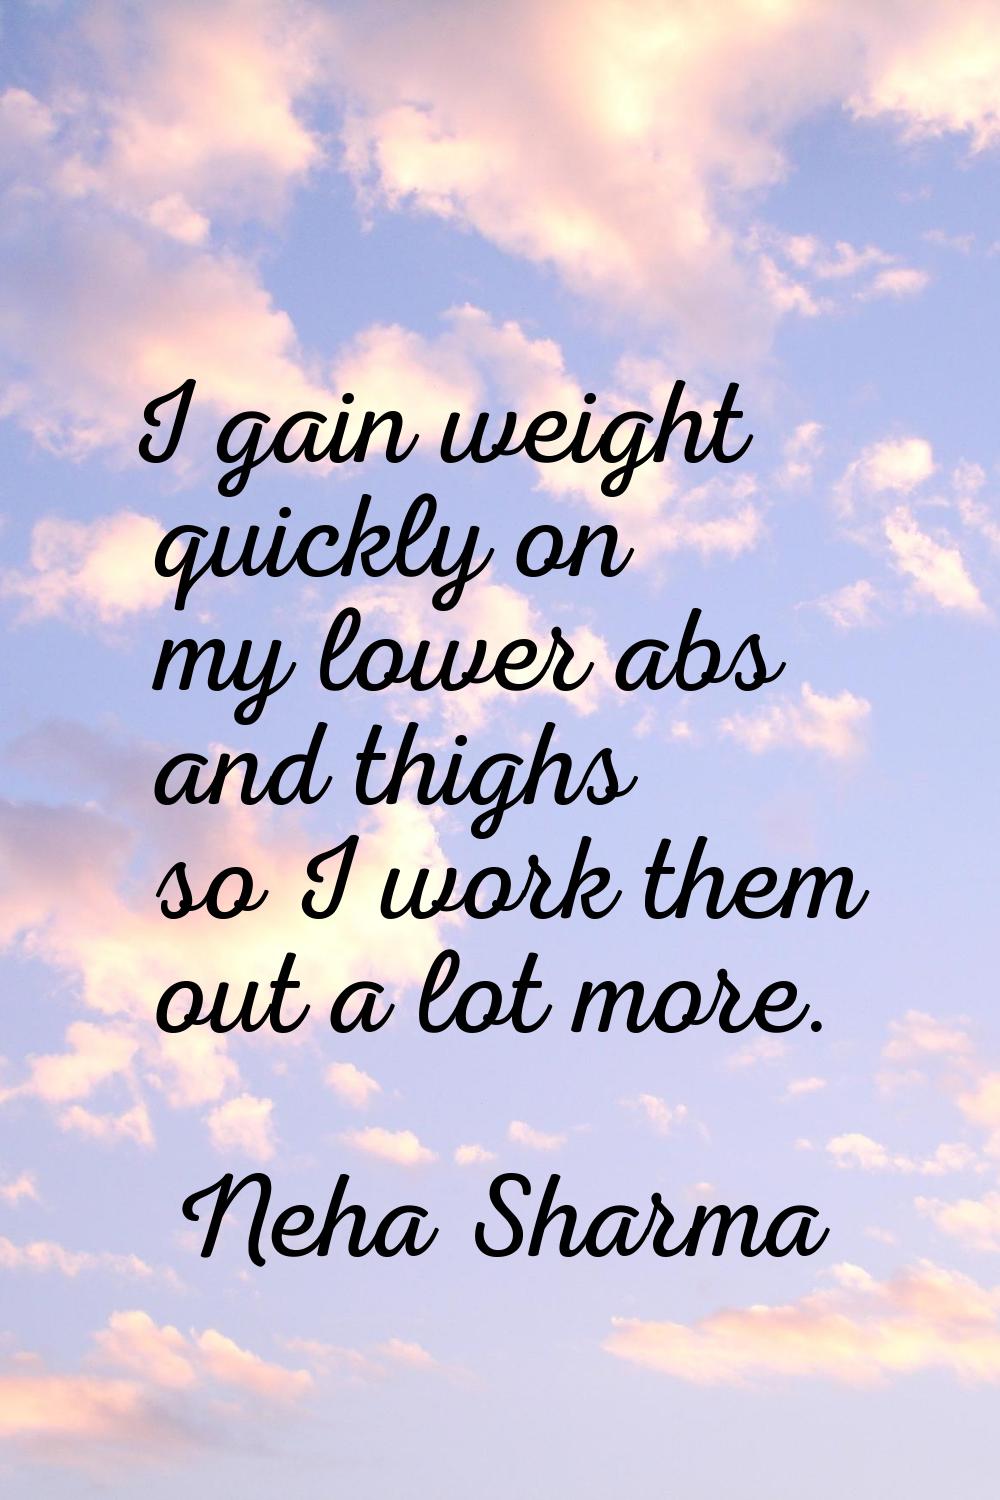 I gain weight quickly on my lower abs and thighs so I work them out a lot more.